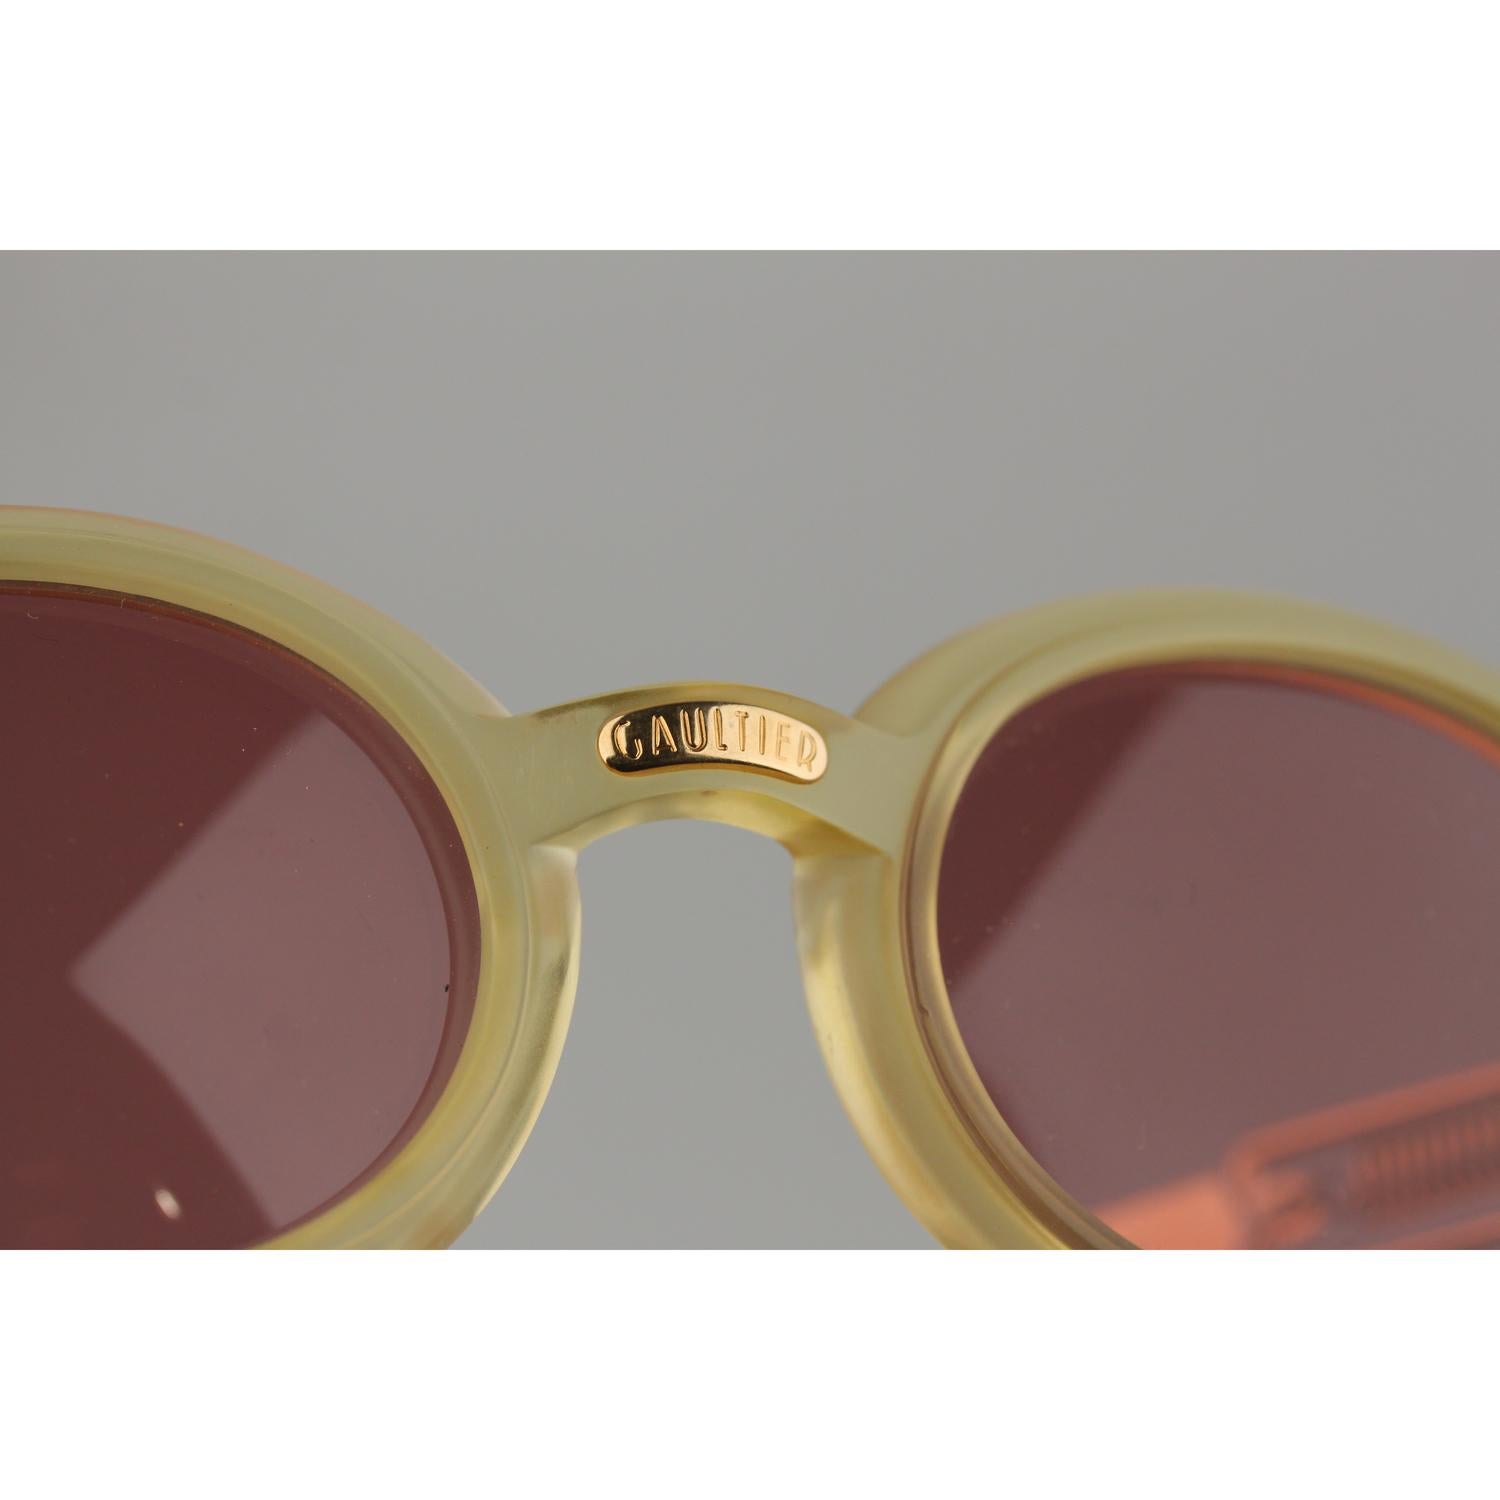 Jean Paul Gaultier Vintage Gold Oval Sunglasses 56-5203 New Old Stock 4